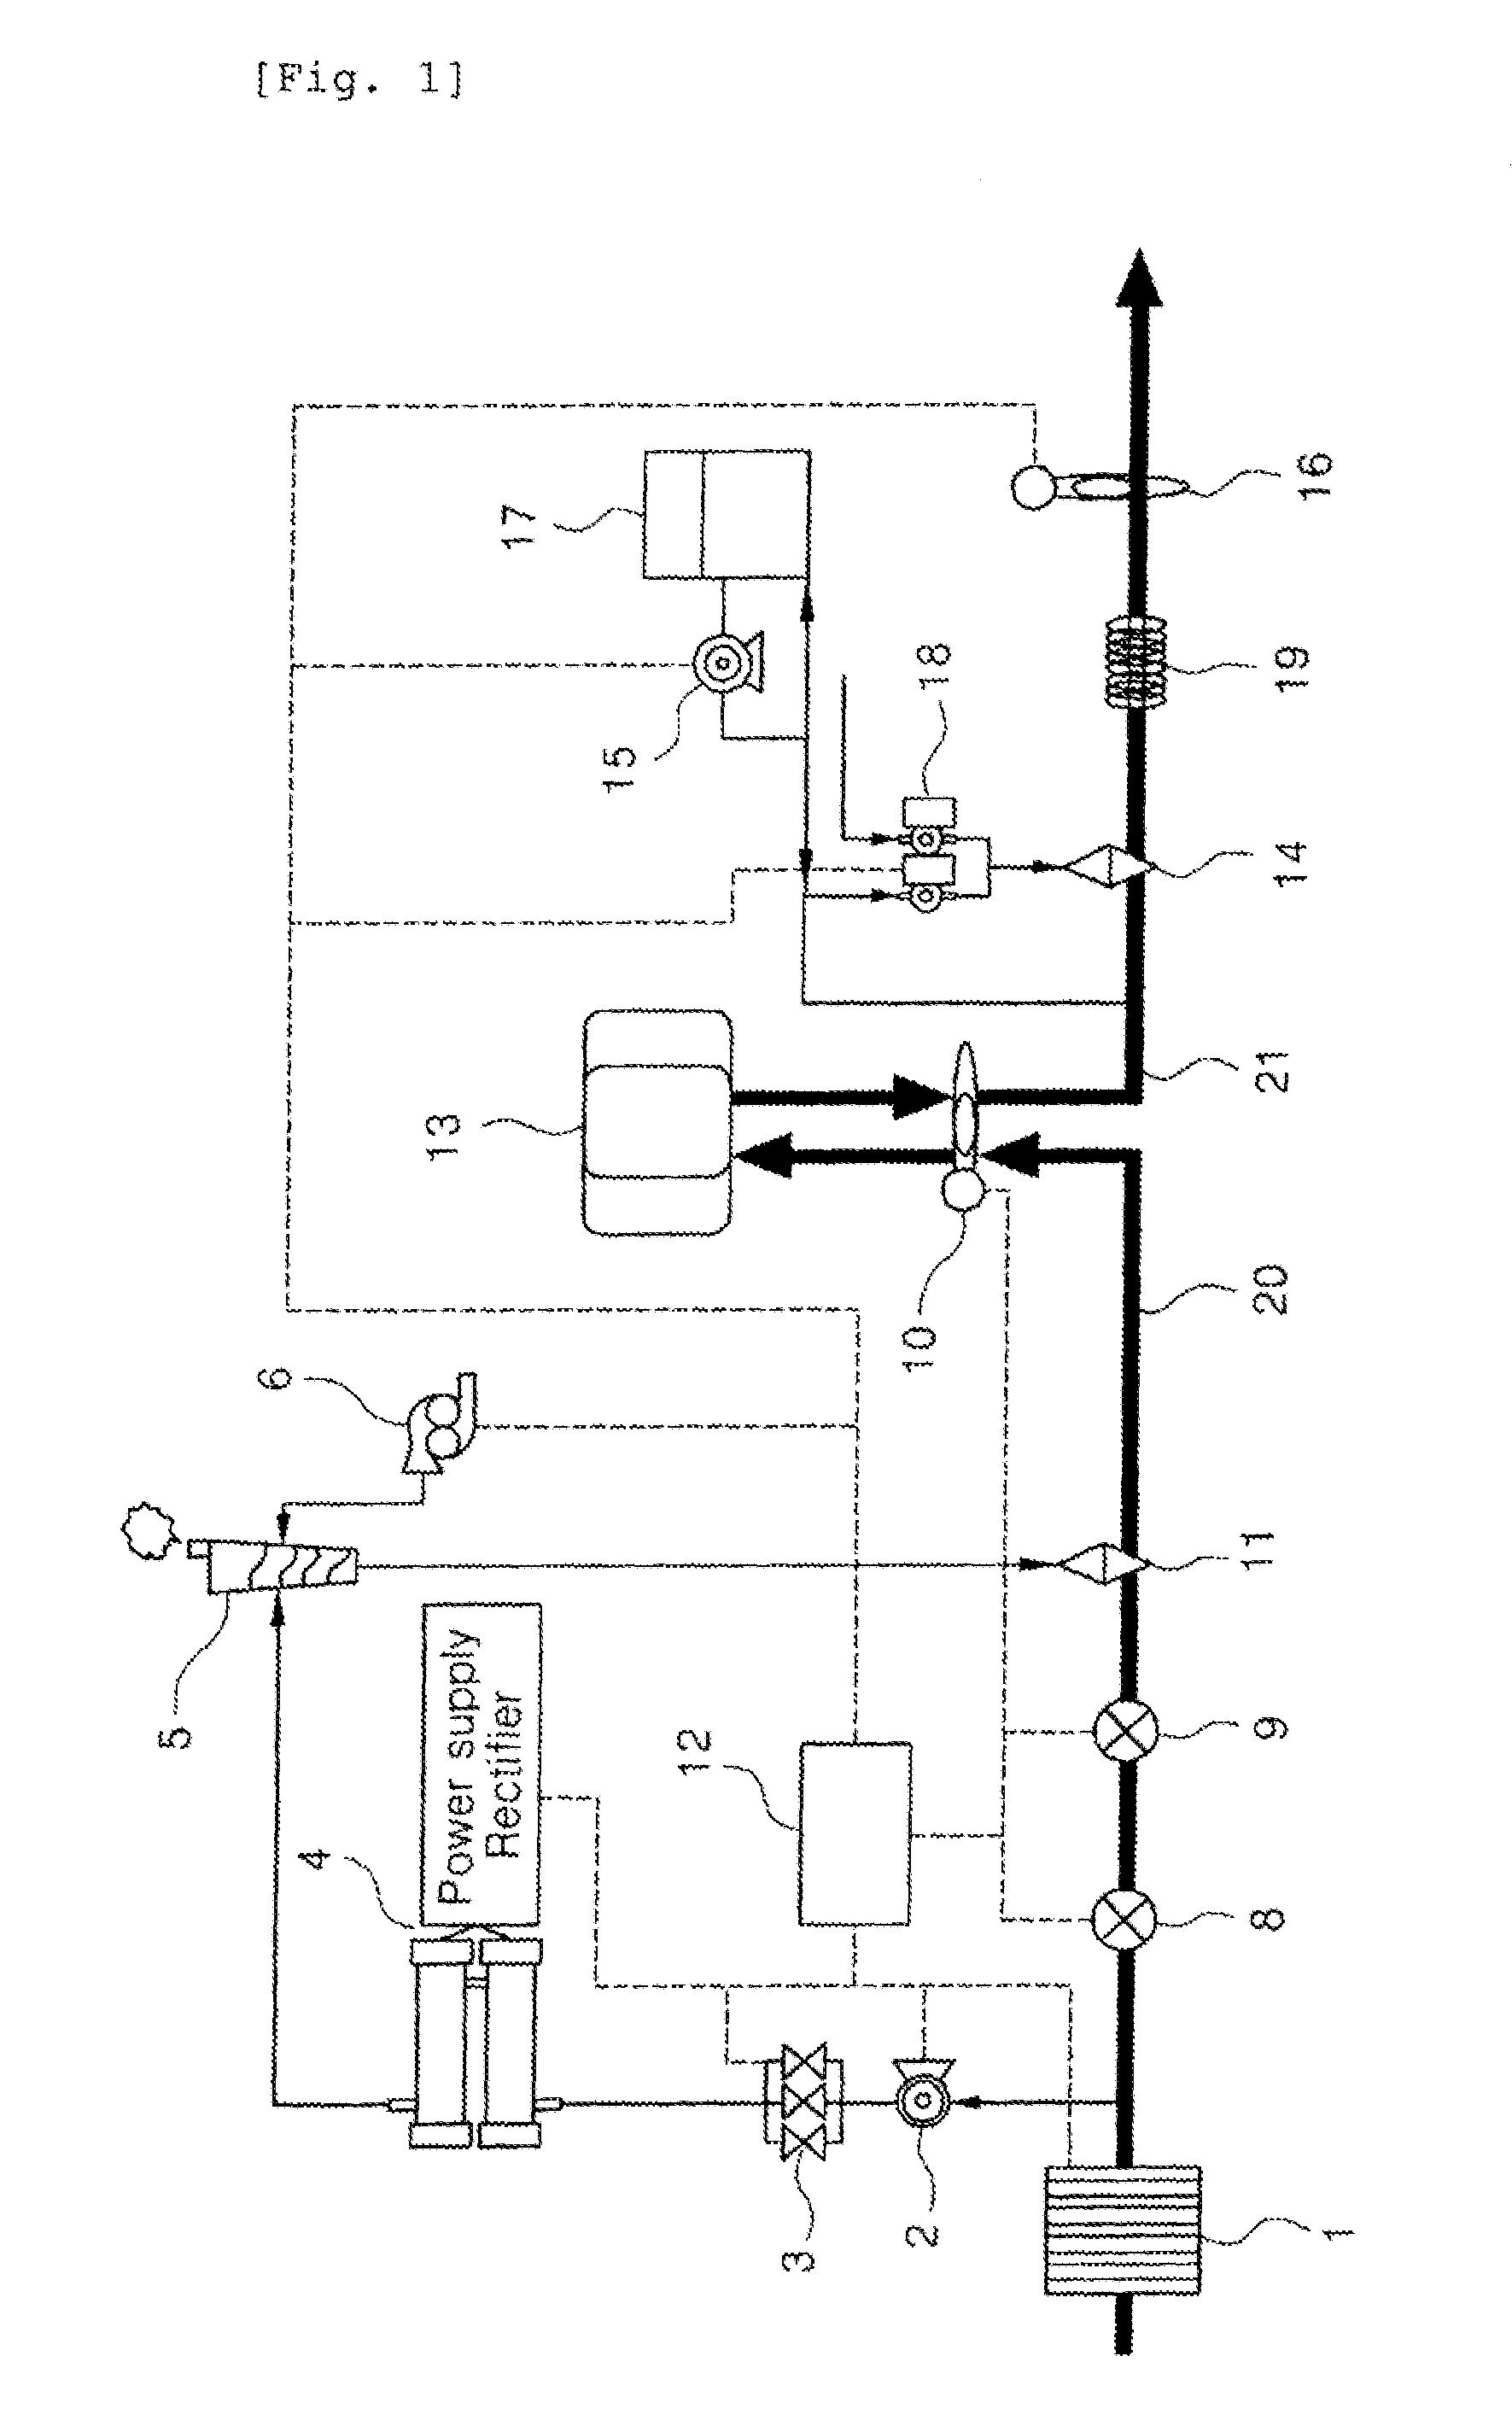 Apparatus and method for treating ballast water